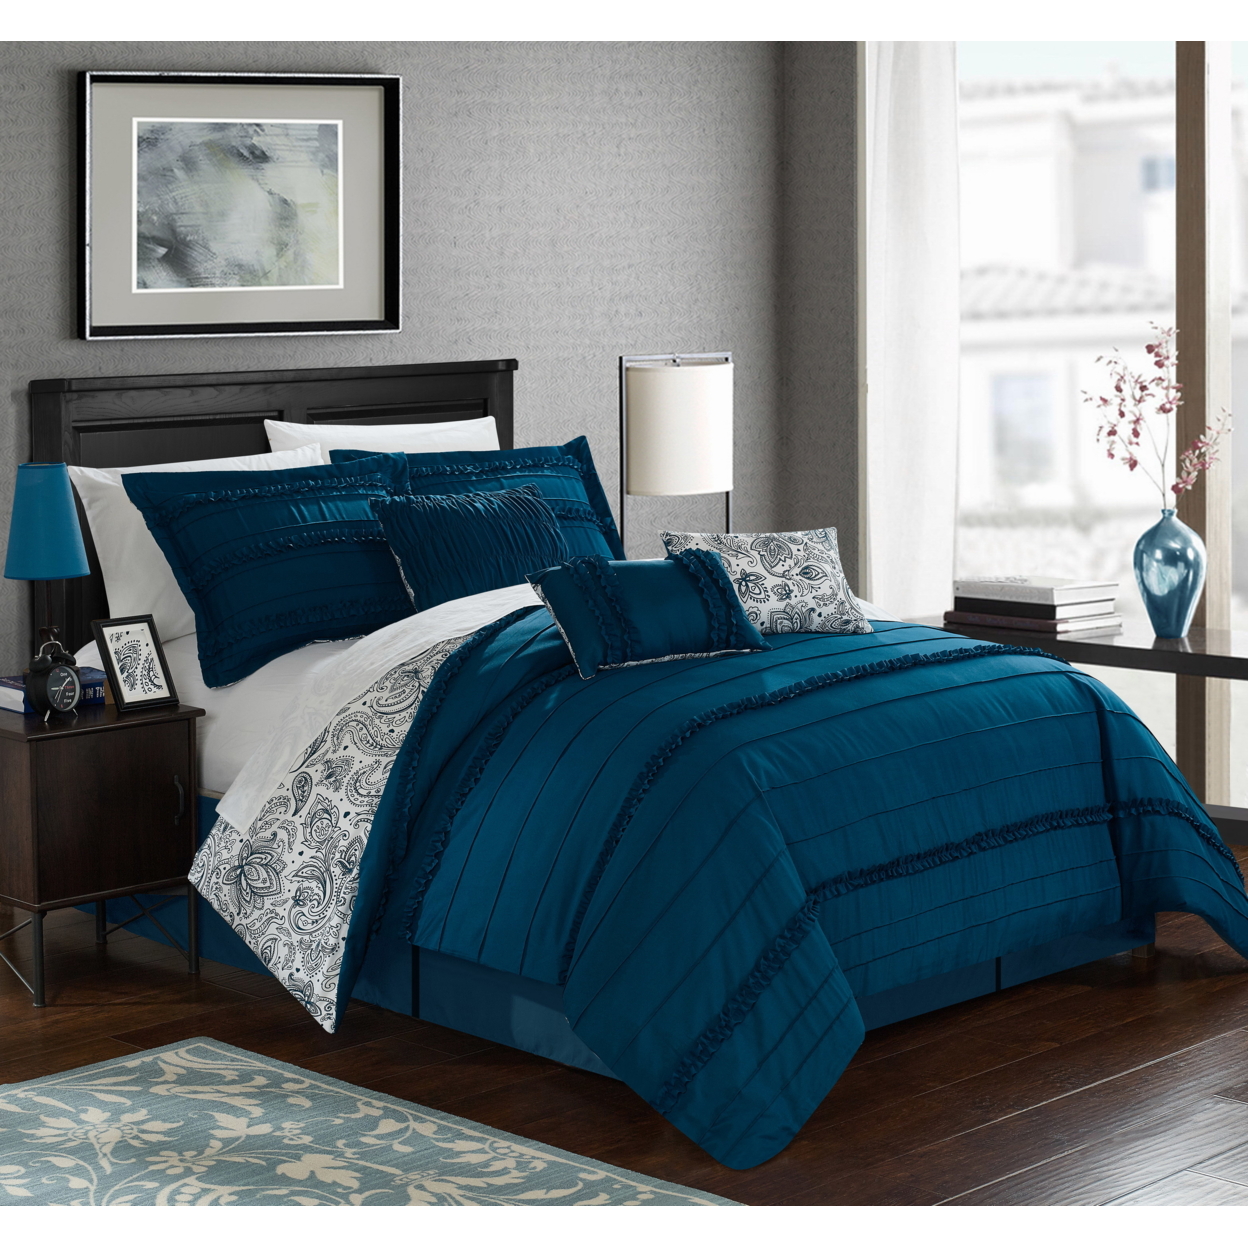 6/7 Piece Thess Pleated And Ruffled REVERSIBLE Paisely FLoral Print Comforter Set Shams And Decorative Pillows Included - Navy, King